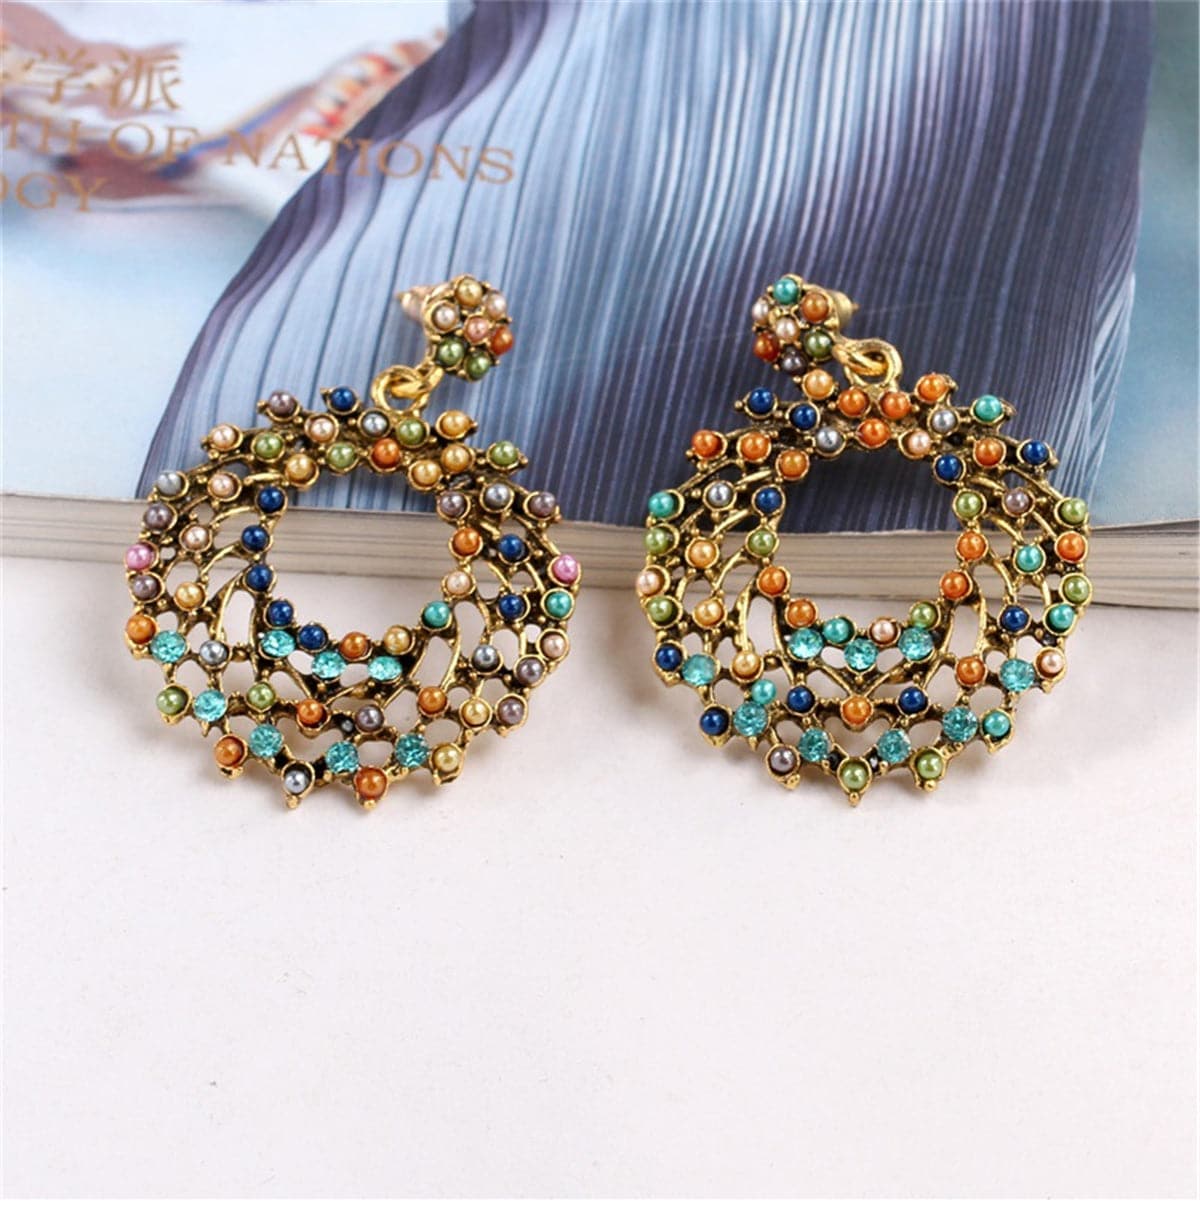 Multicolor Pearl & 18K Gold-Plated Circle Drop Earrings